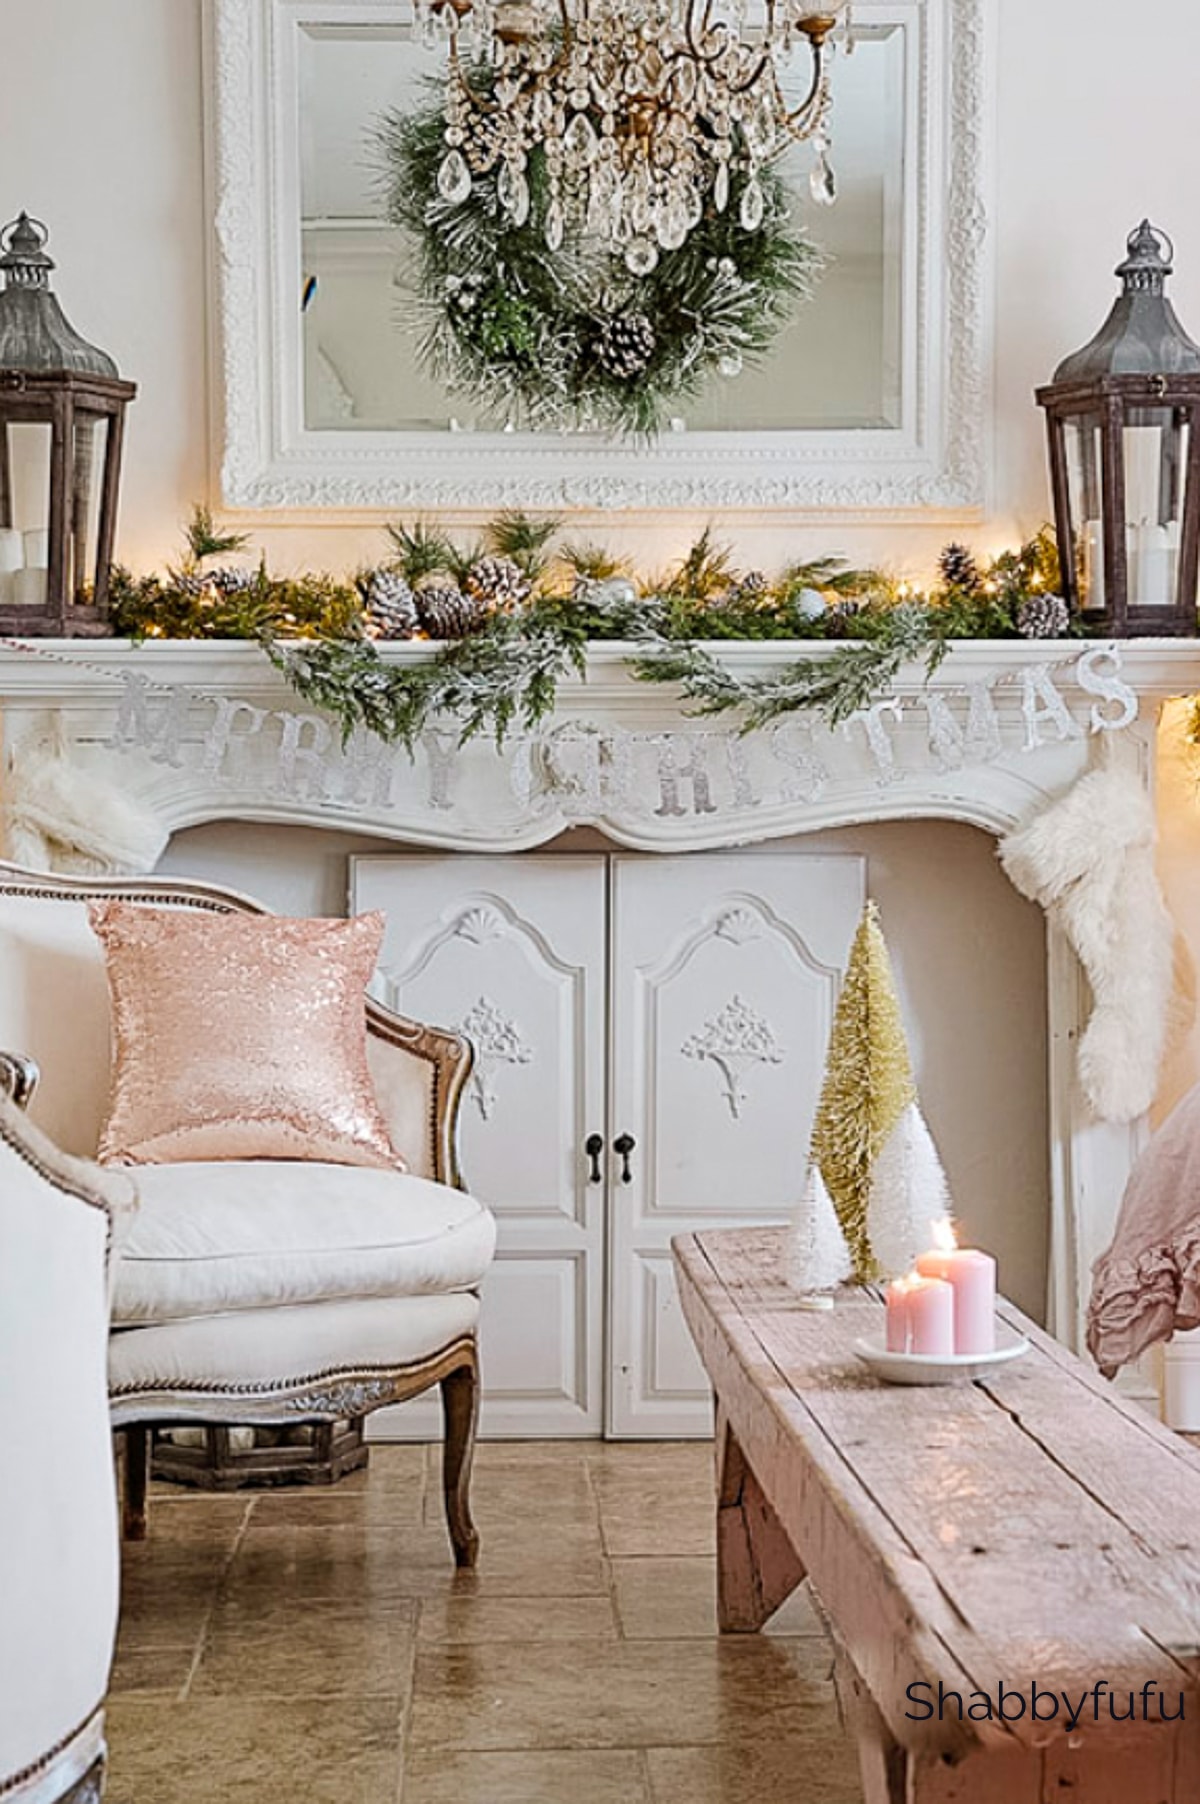 Christmas decorating style in pink